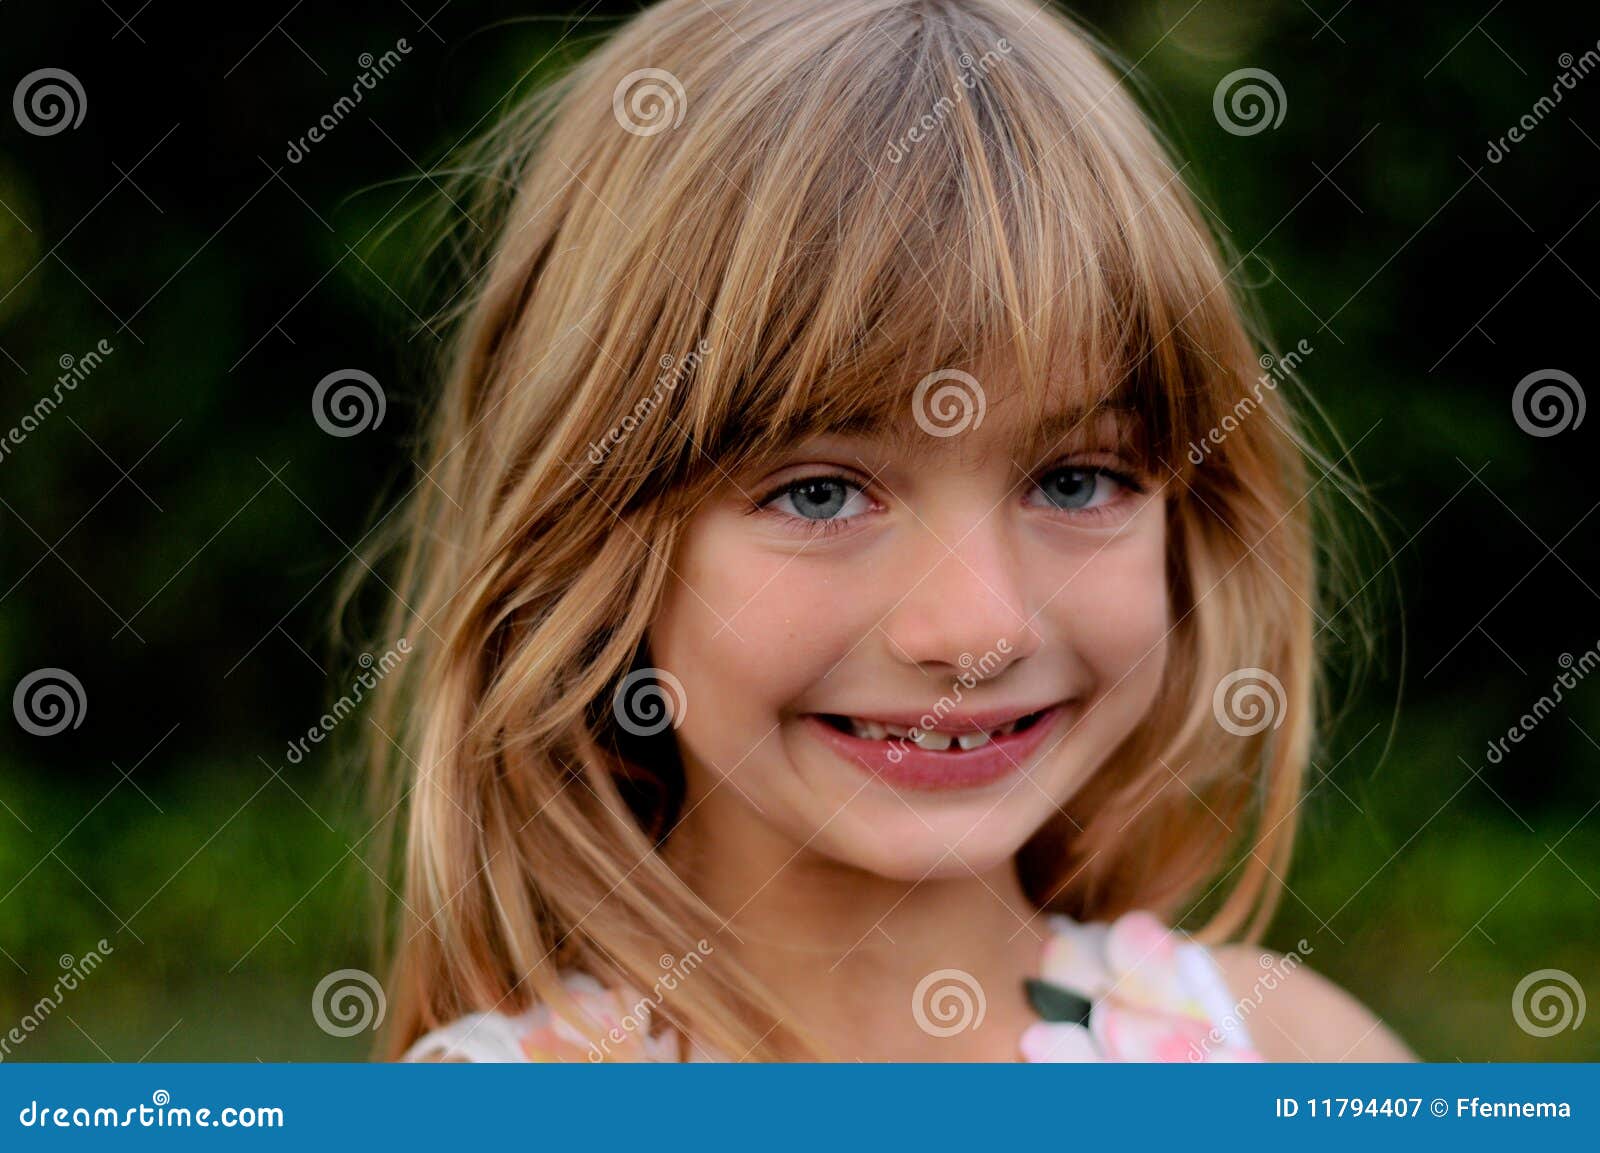 Cute Child Close Up with Blurred Green Background Stock Image - Image ...